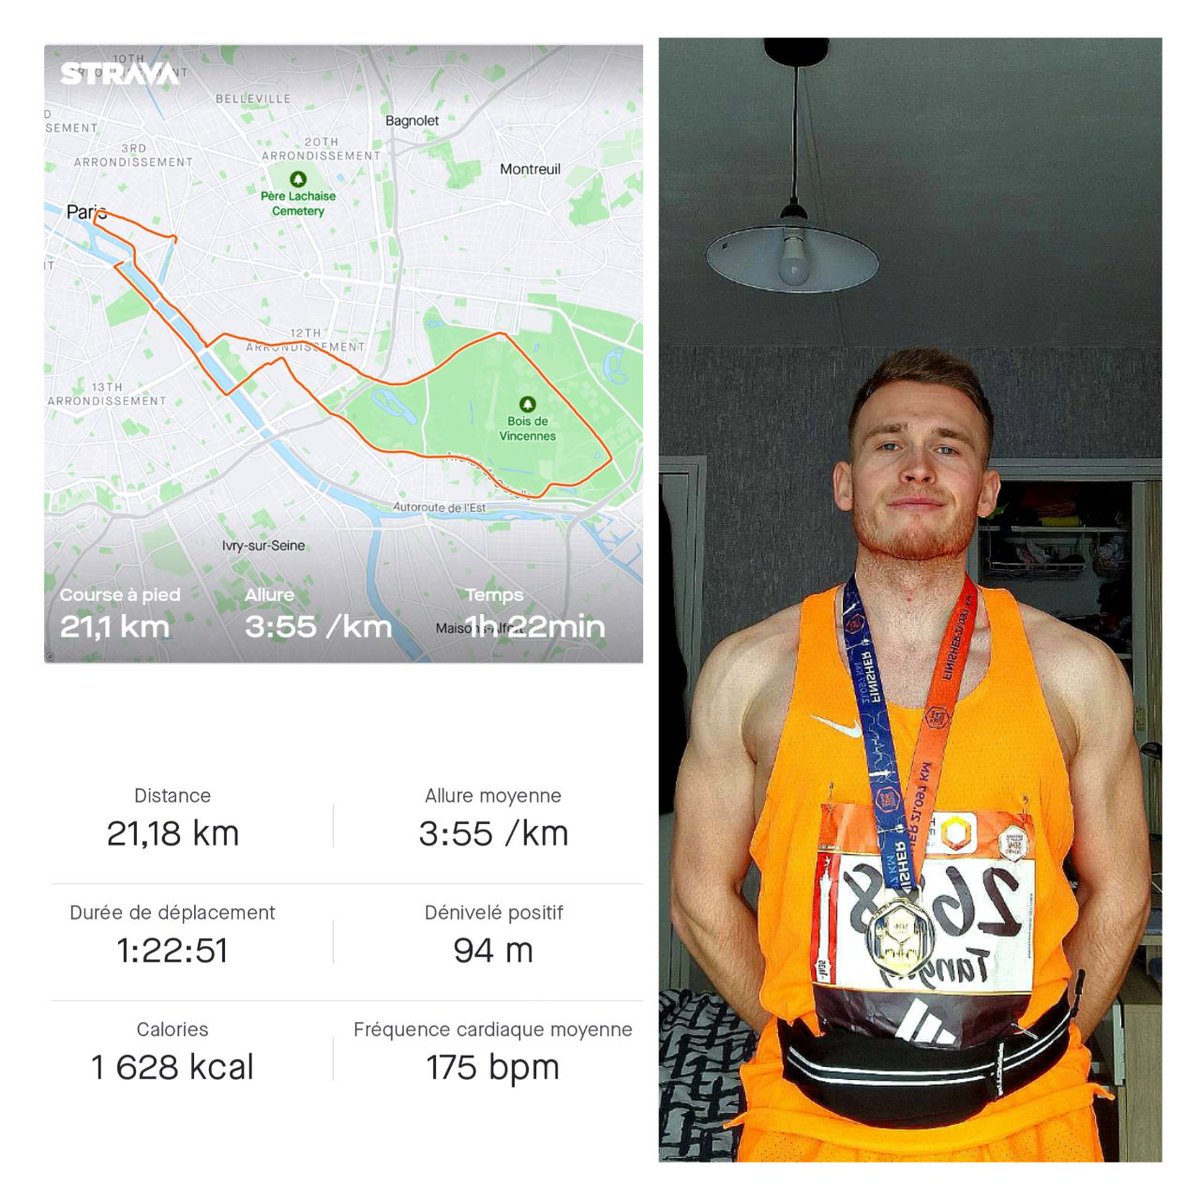 I ran my first half marathon this morning in Paris, incredible atmosphere and impeccable organization, very happy with my time (real is 1h 23min 48s), the preparation continues for the marathon 💪😁
A really nice experience 
Ranking : 1 380 / 43 000
#semideparis #semimarathon